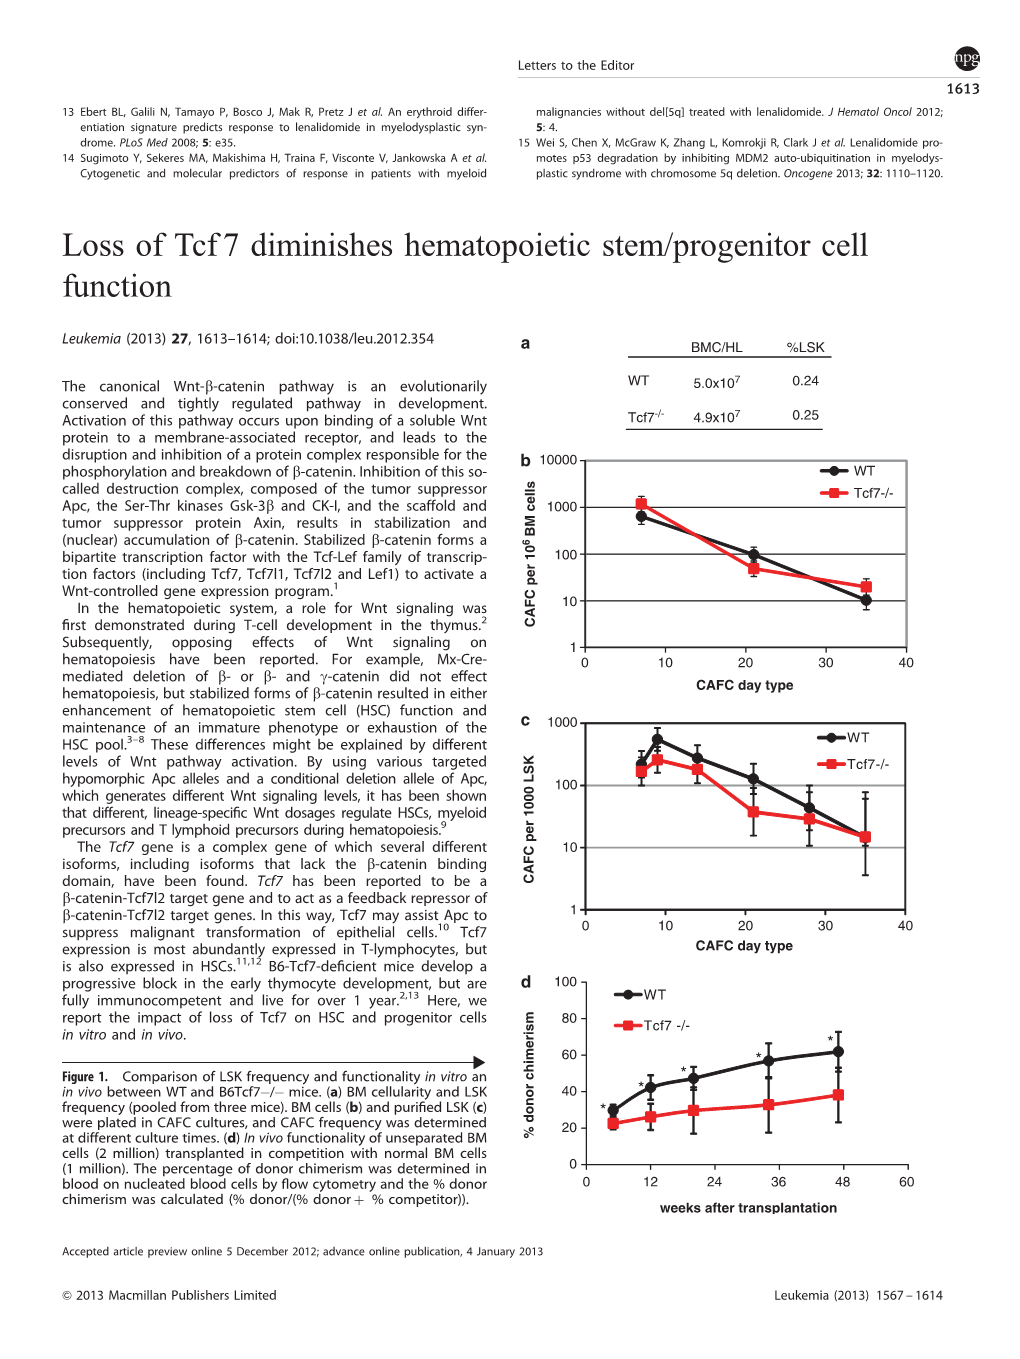 Loss of Tcf7 Diminishes Hematopoietic Stem&Sol